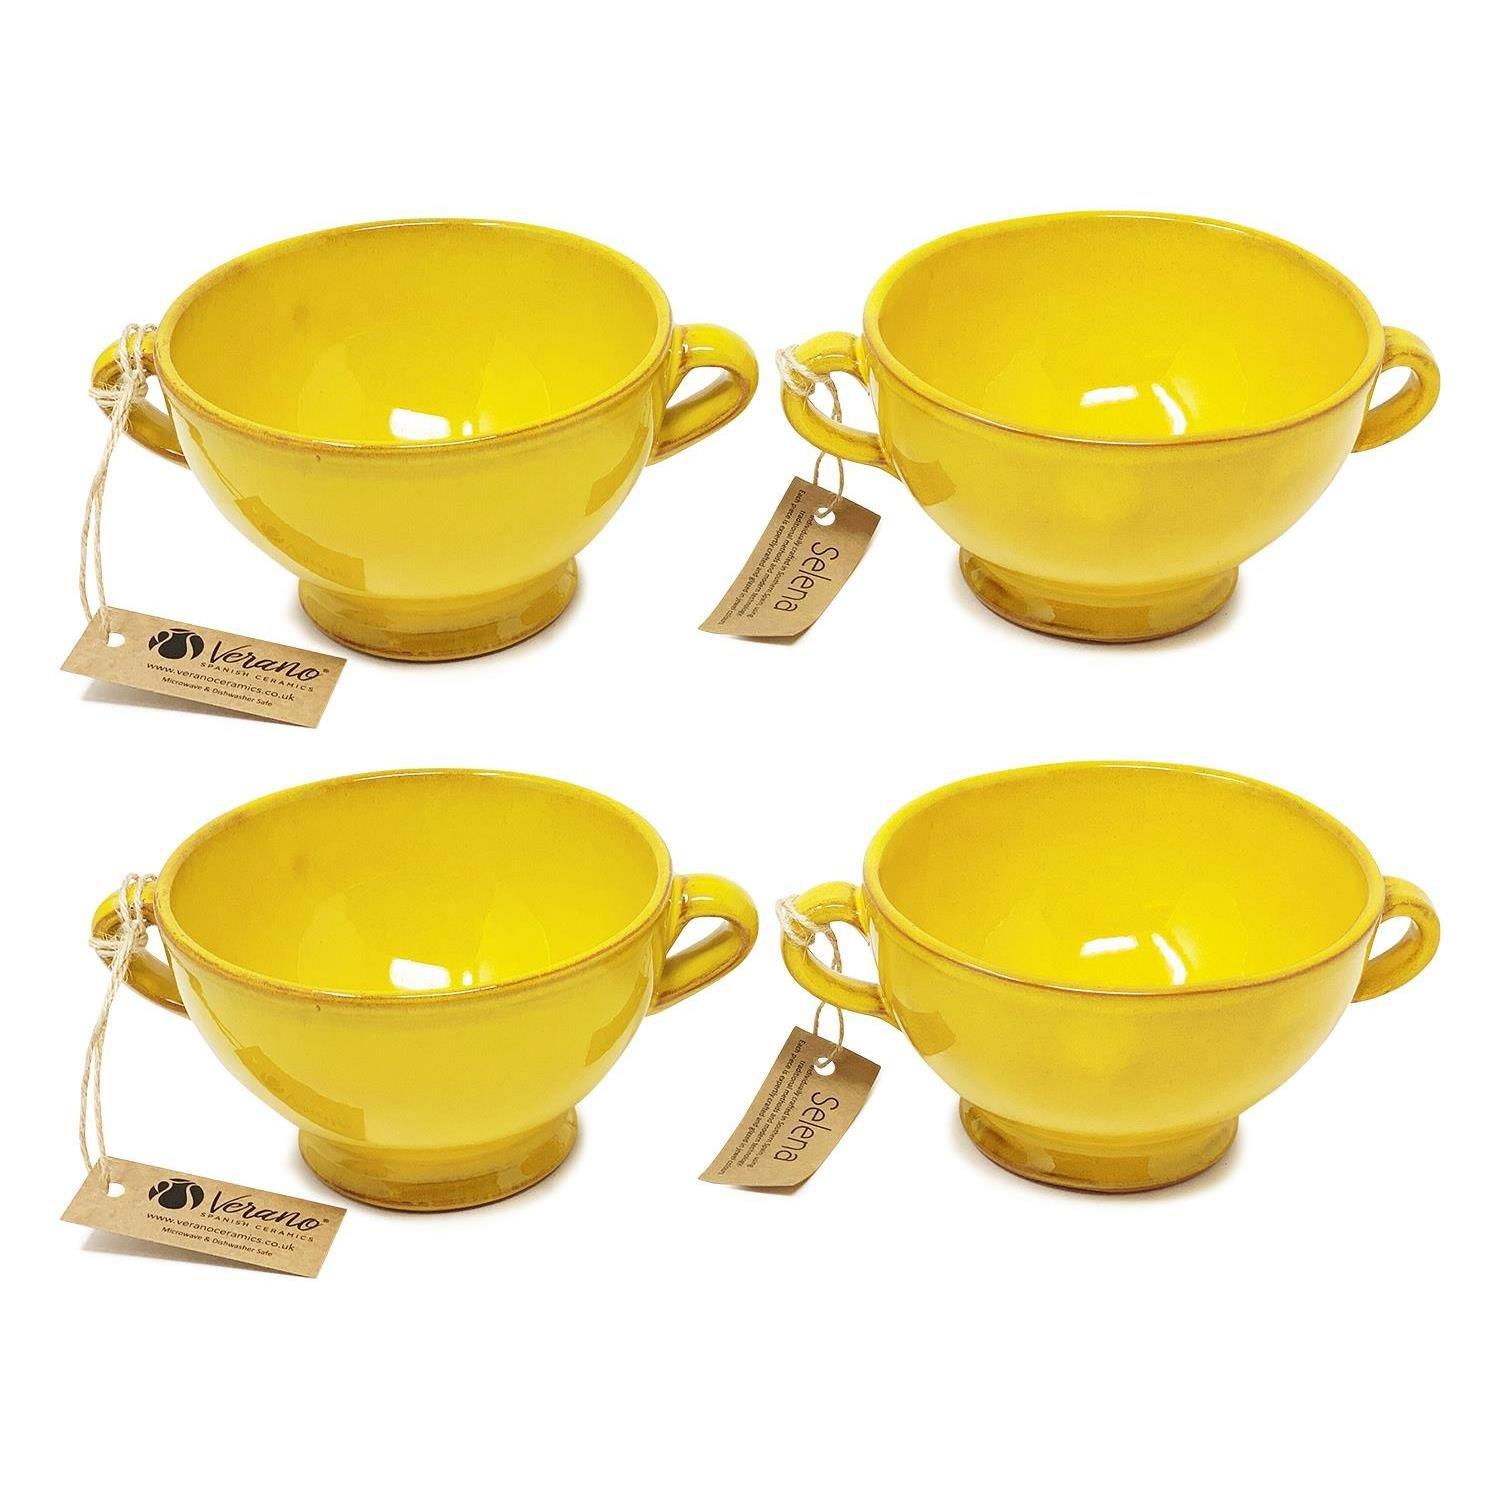 Selena Glazed Hand Dipped Kitchen Dining Set of 4 Soup Bowls (H) 9.5cm x (W) 14cm